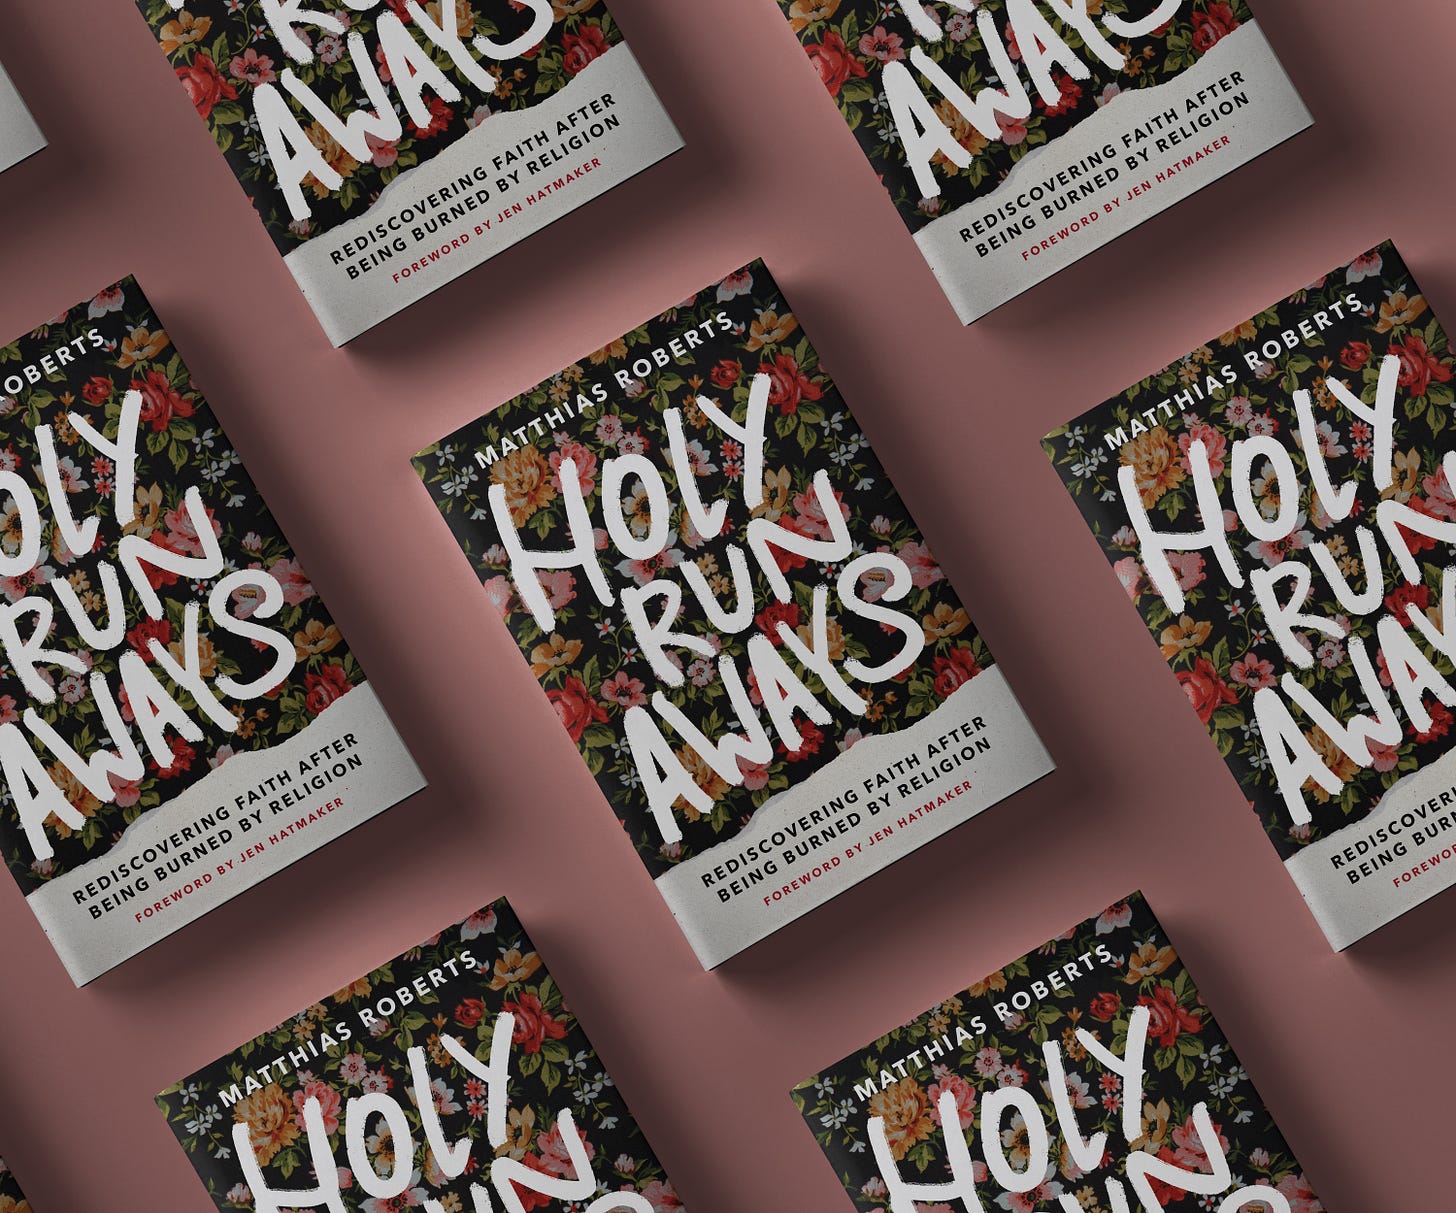 Several copies of Holy Runaways arranged neatly on a dusty pink background. The book cover has dark floral print with the words "Holy Runaways" in bold white handwriting.